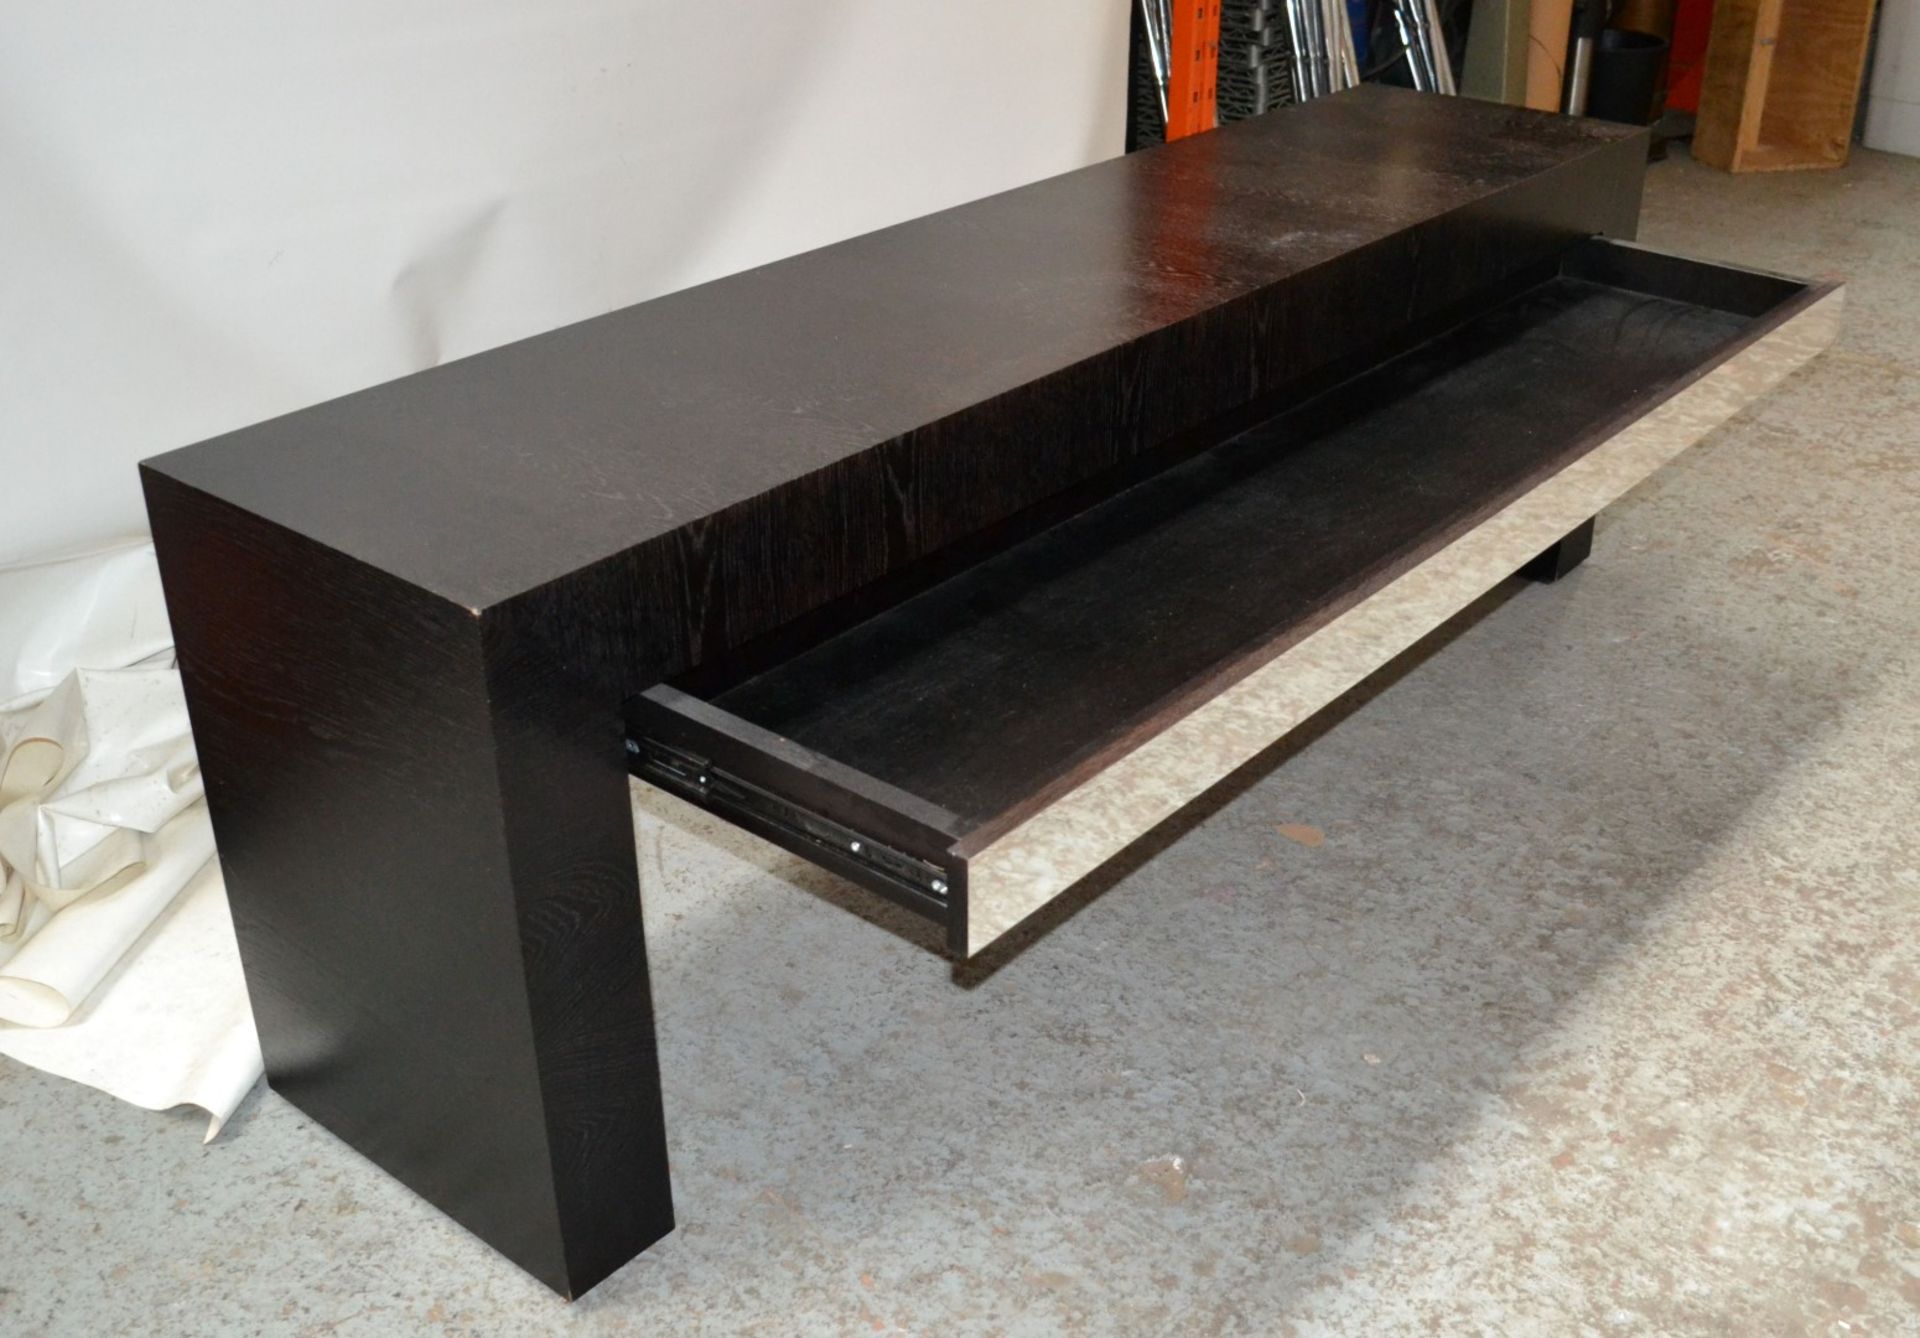 1 x Long Black Serving Table with Cutlery Drawer - CL314 - Location: Altrincham WA14 - *NO VAT On Ha - Image 12 of 14